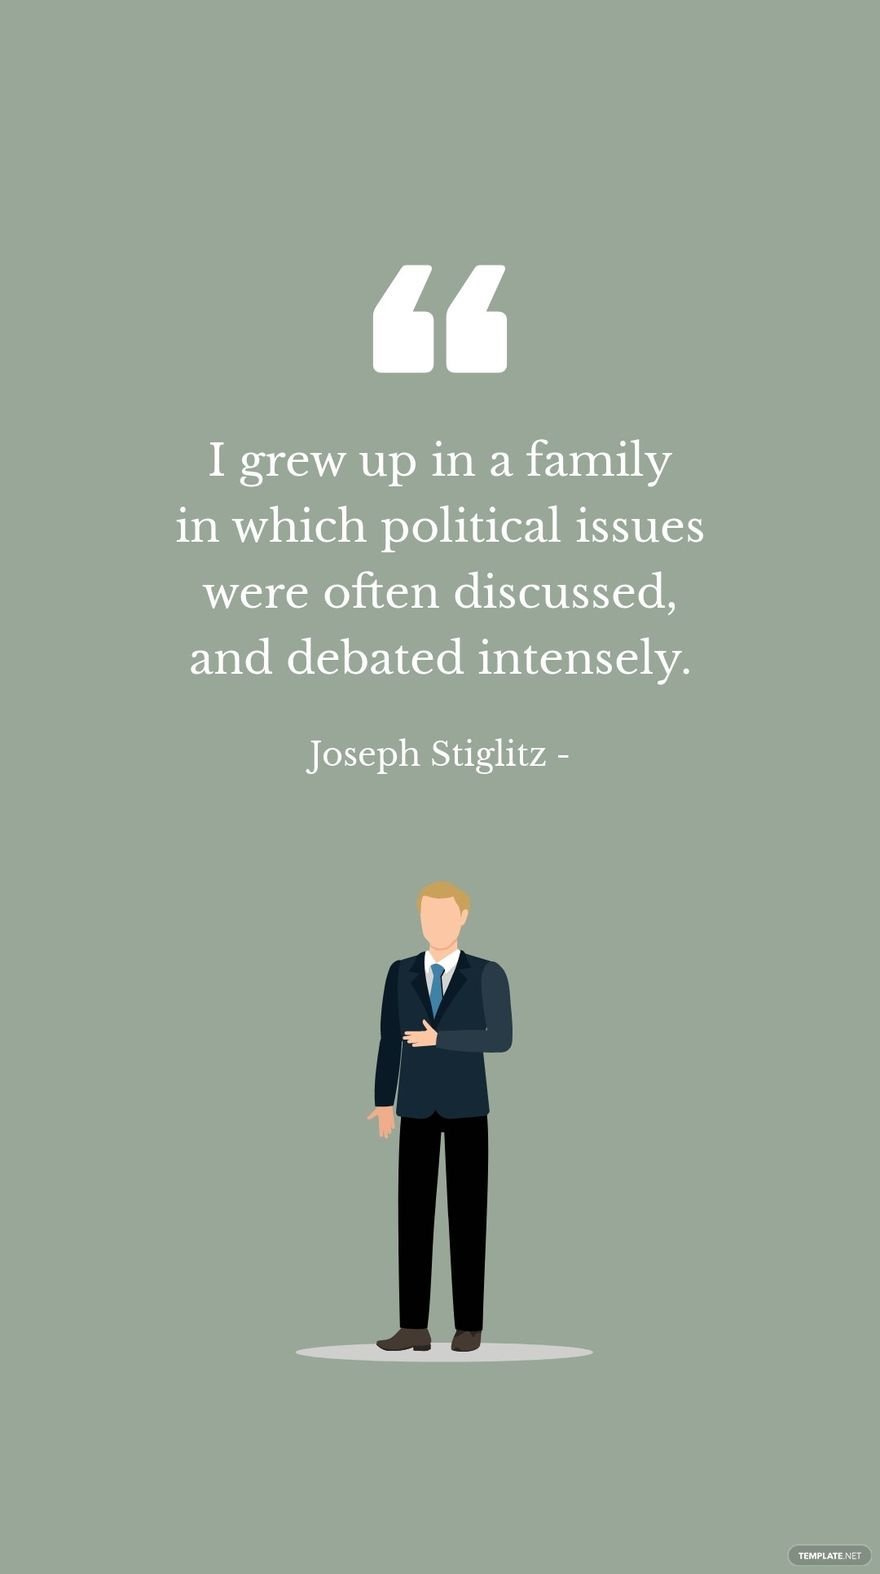 Free Joseph Stiglitz - I grew up in a family in which political issues were often discussed, and debated intensely. in JPG